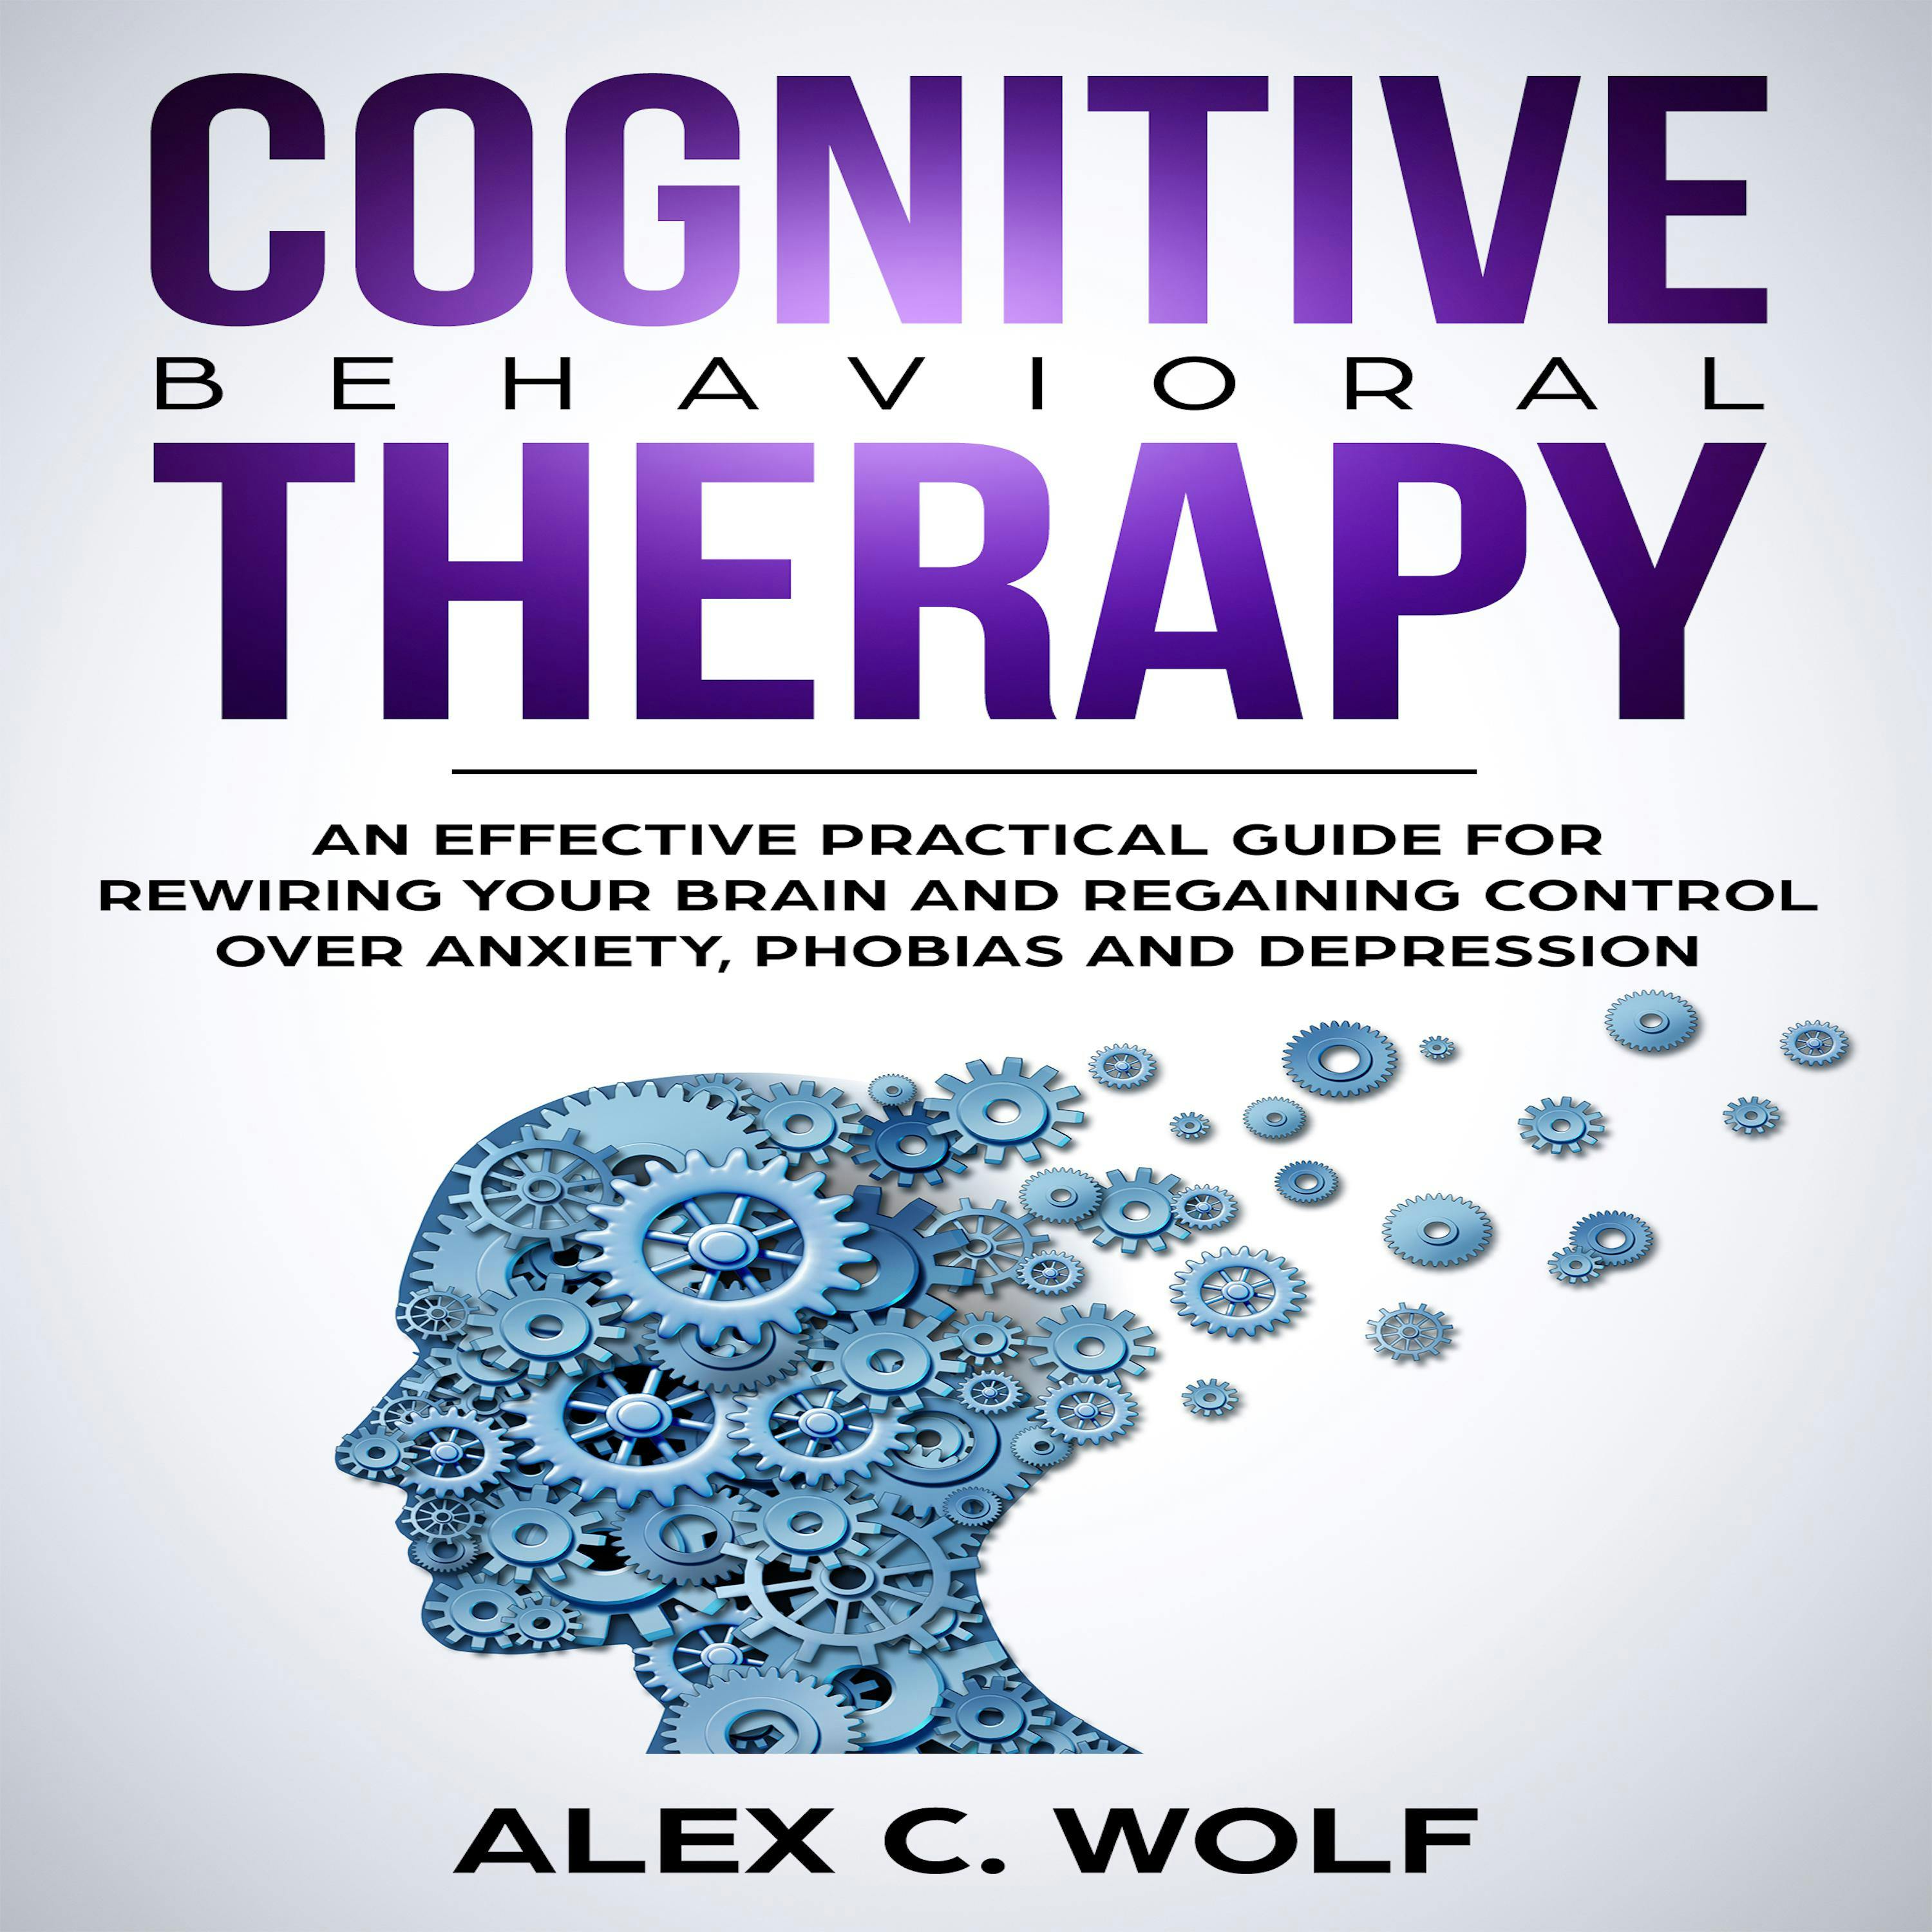 Cognitive Behavioral Therapy: An Effective Practical Guide for Rewiring Your Brain and Regaining Control Over Anxiety, Phobias, and Depression - Alex C. Wolf